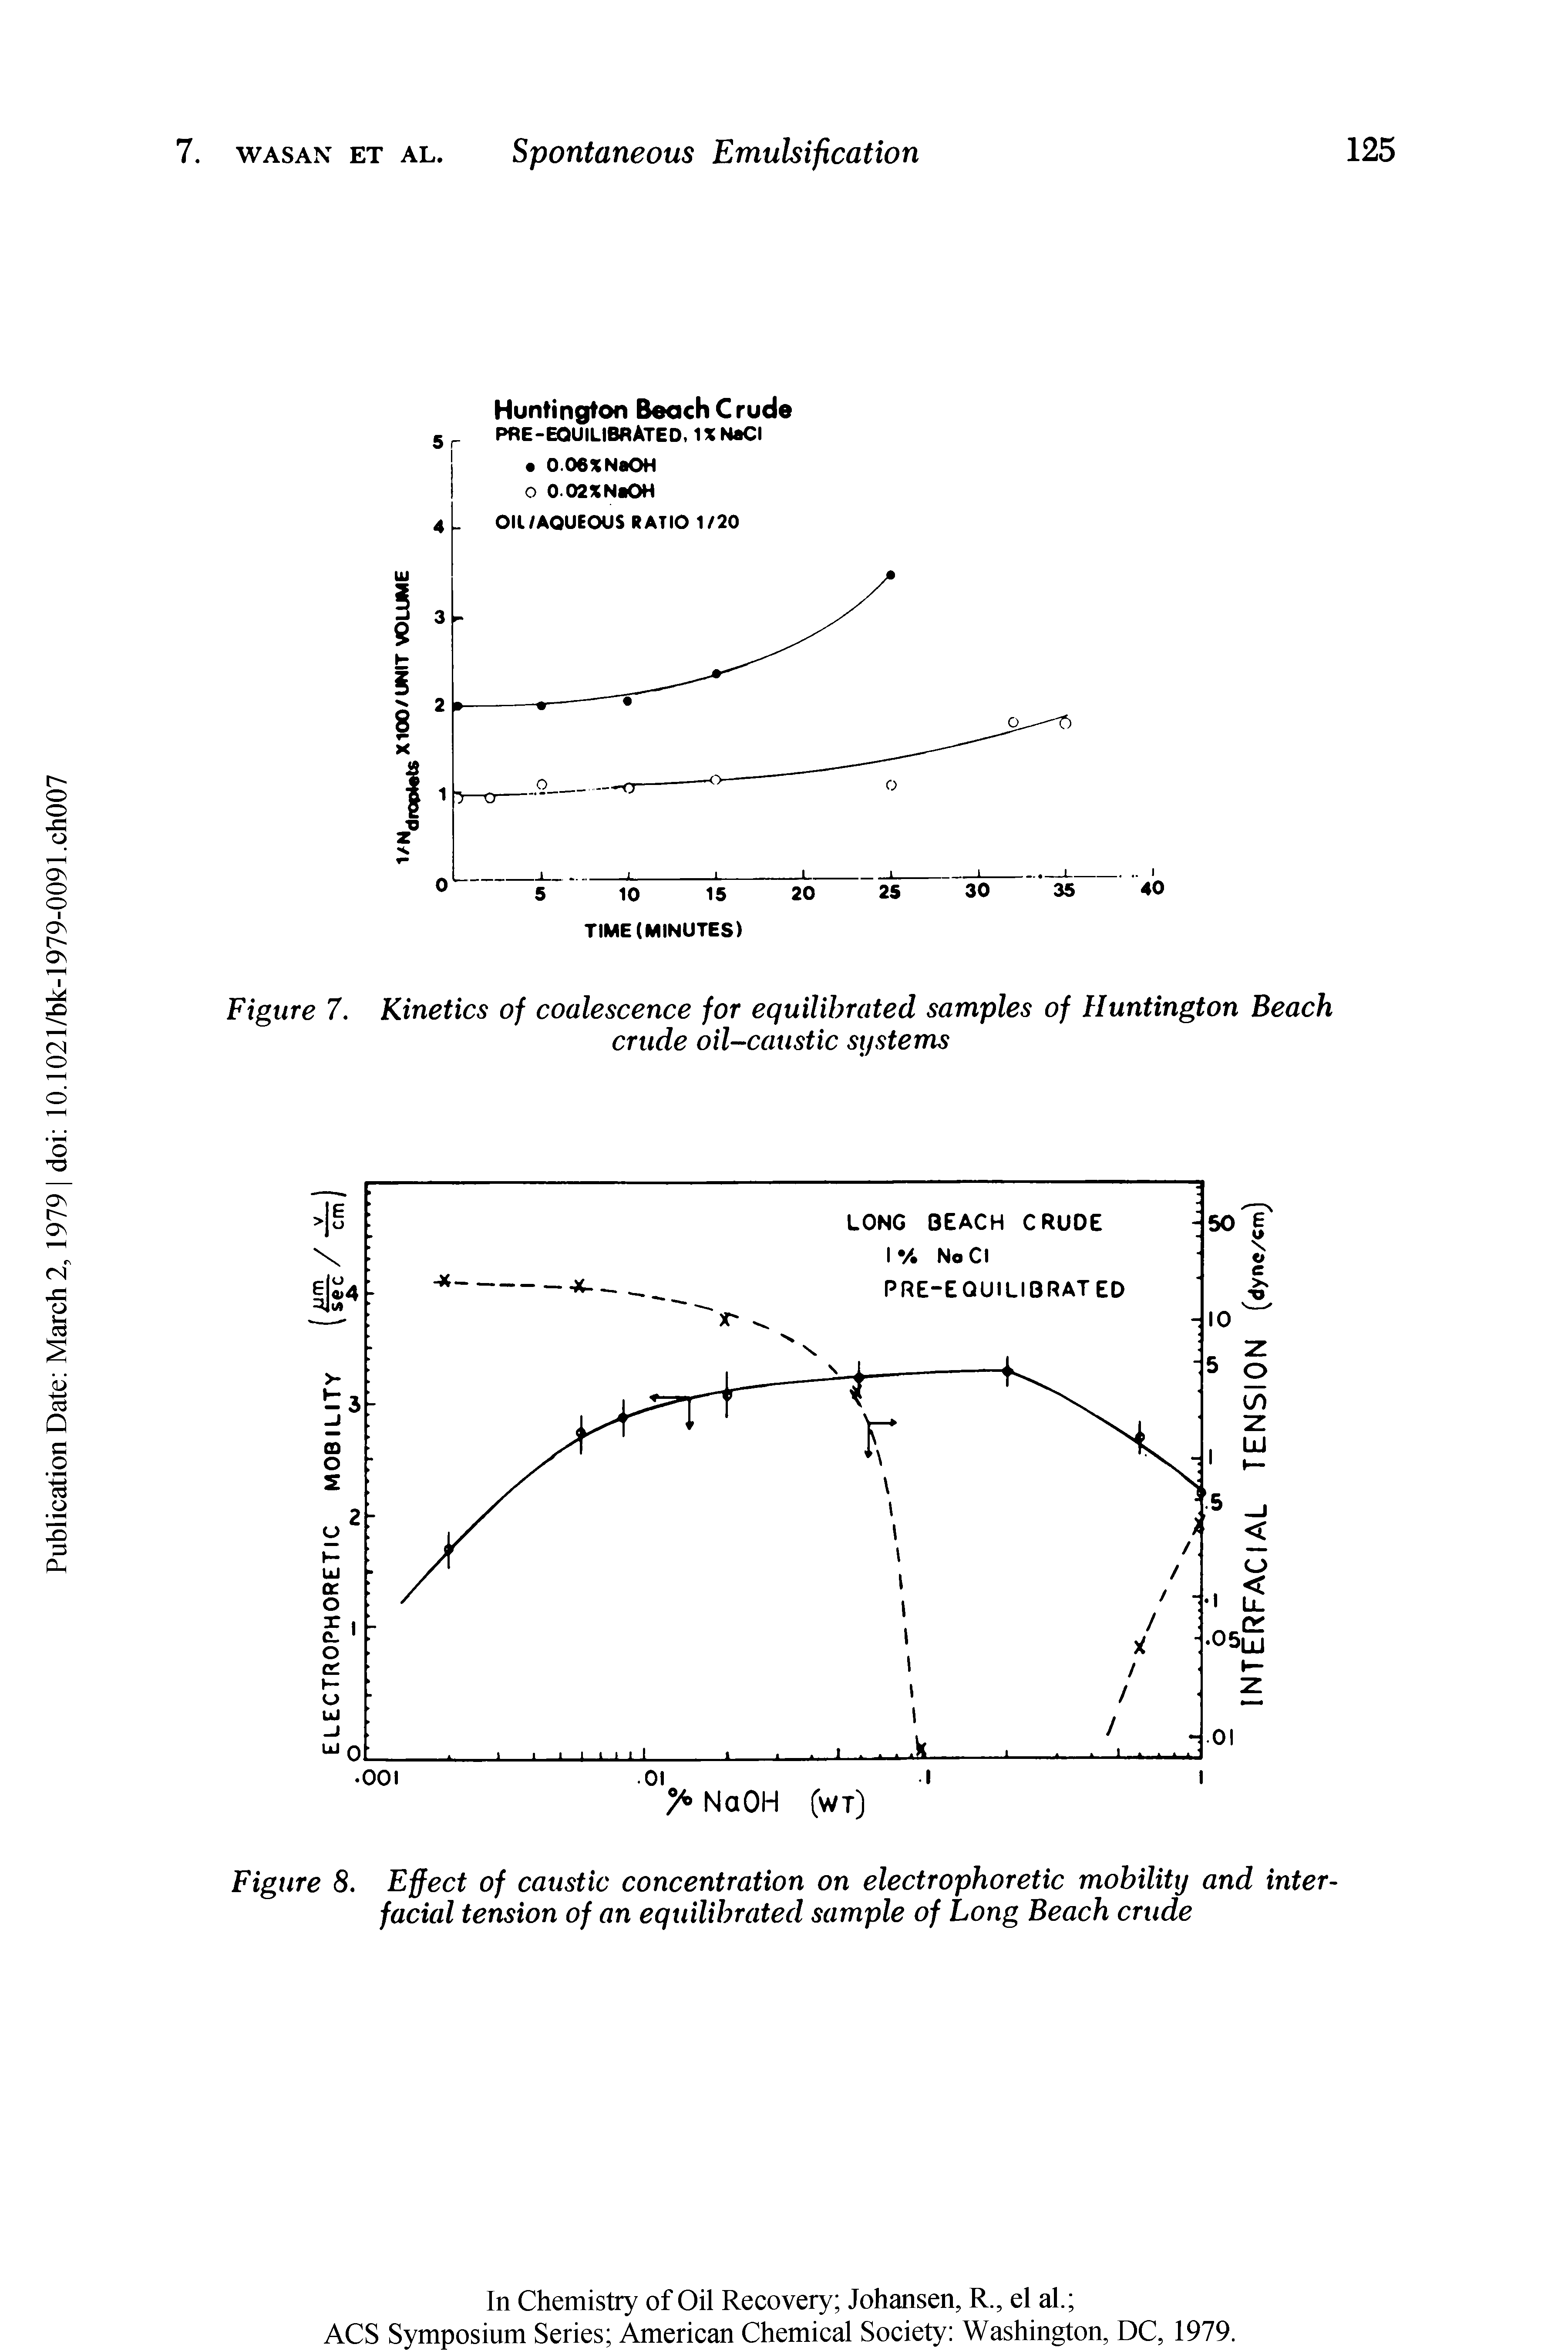 Figure 7. Kinetics of coalescence for equilibrated samples of Huntington Beach crude oil-caustic systems...